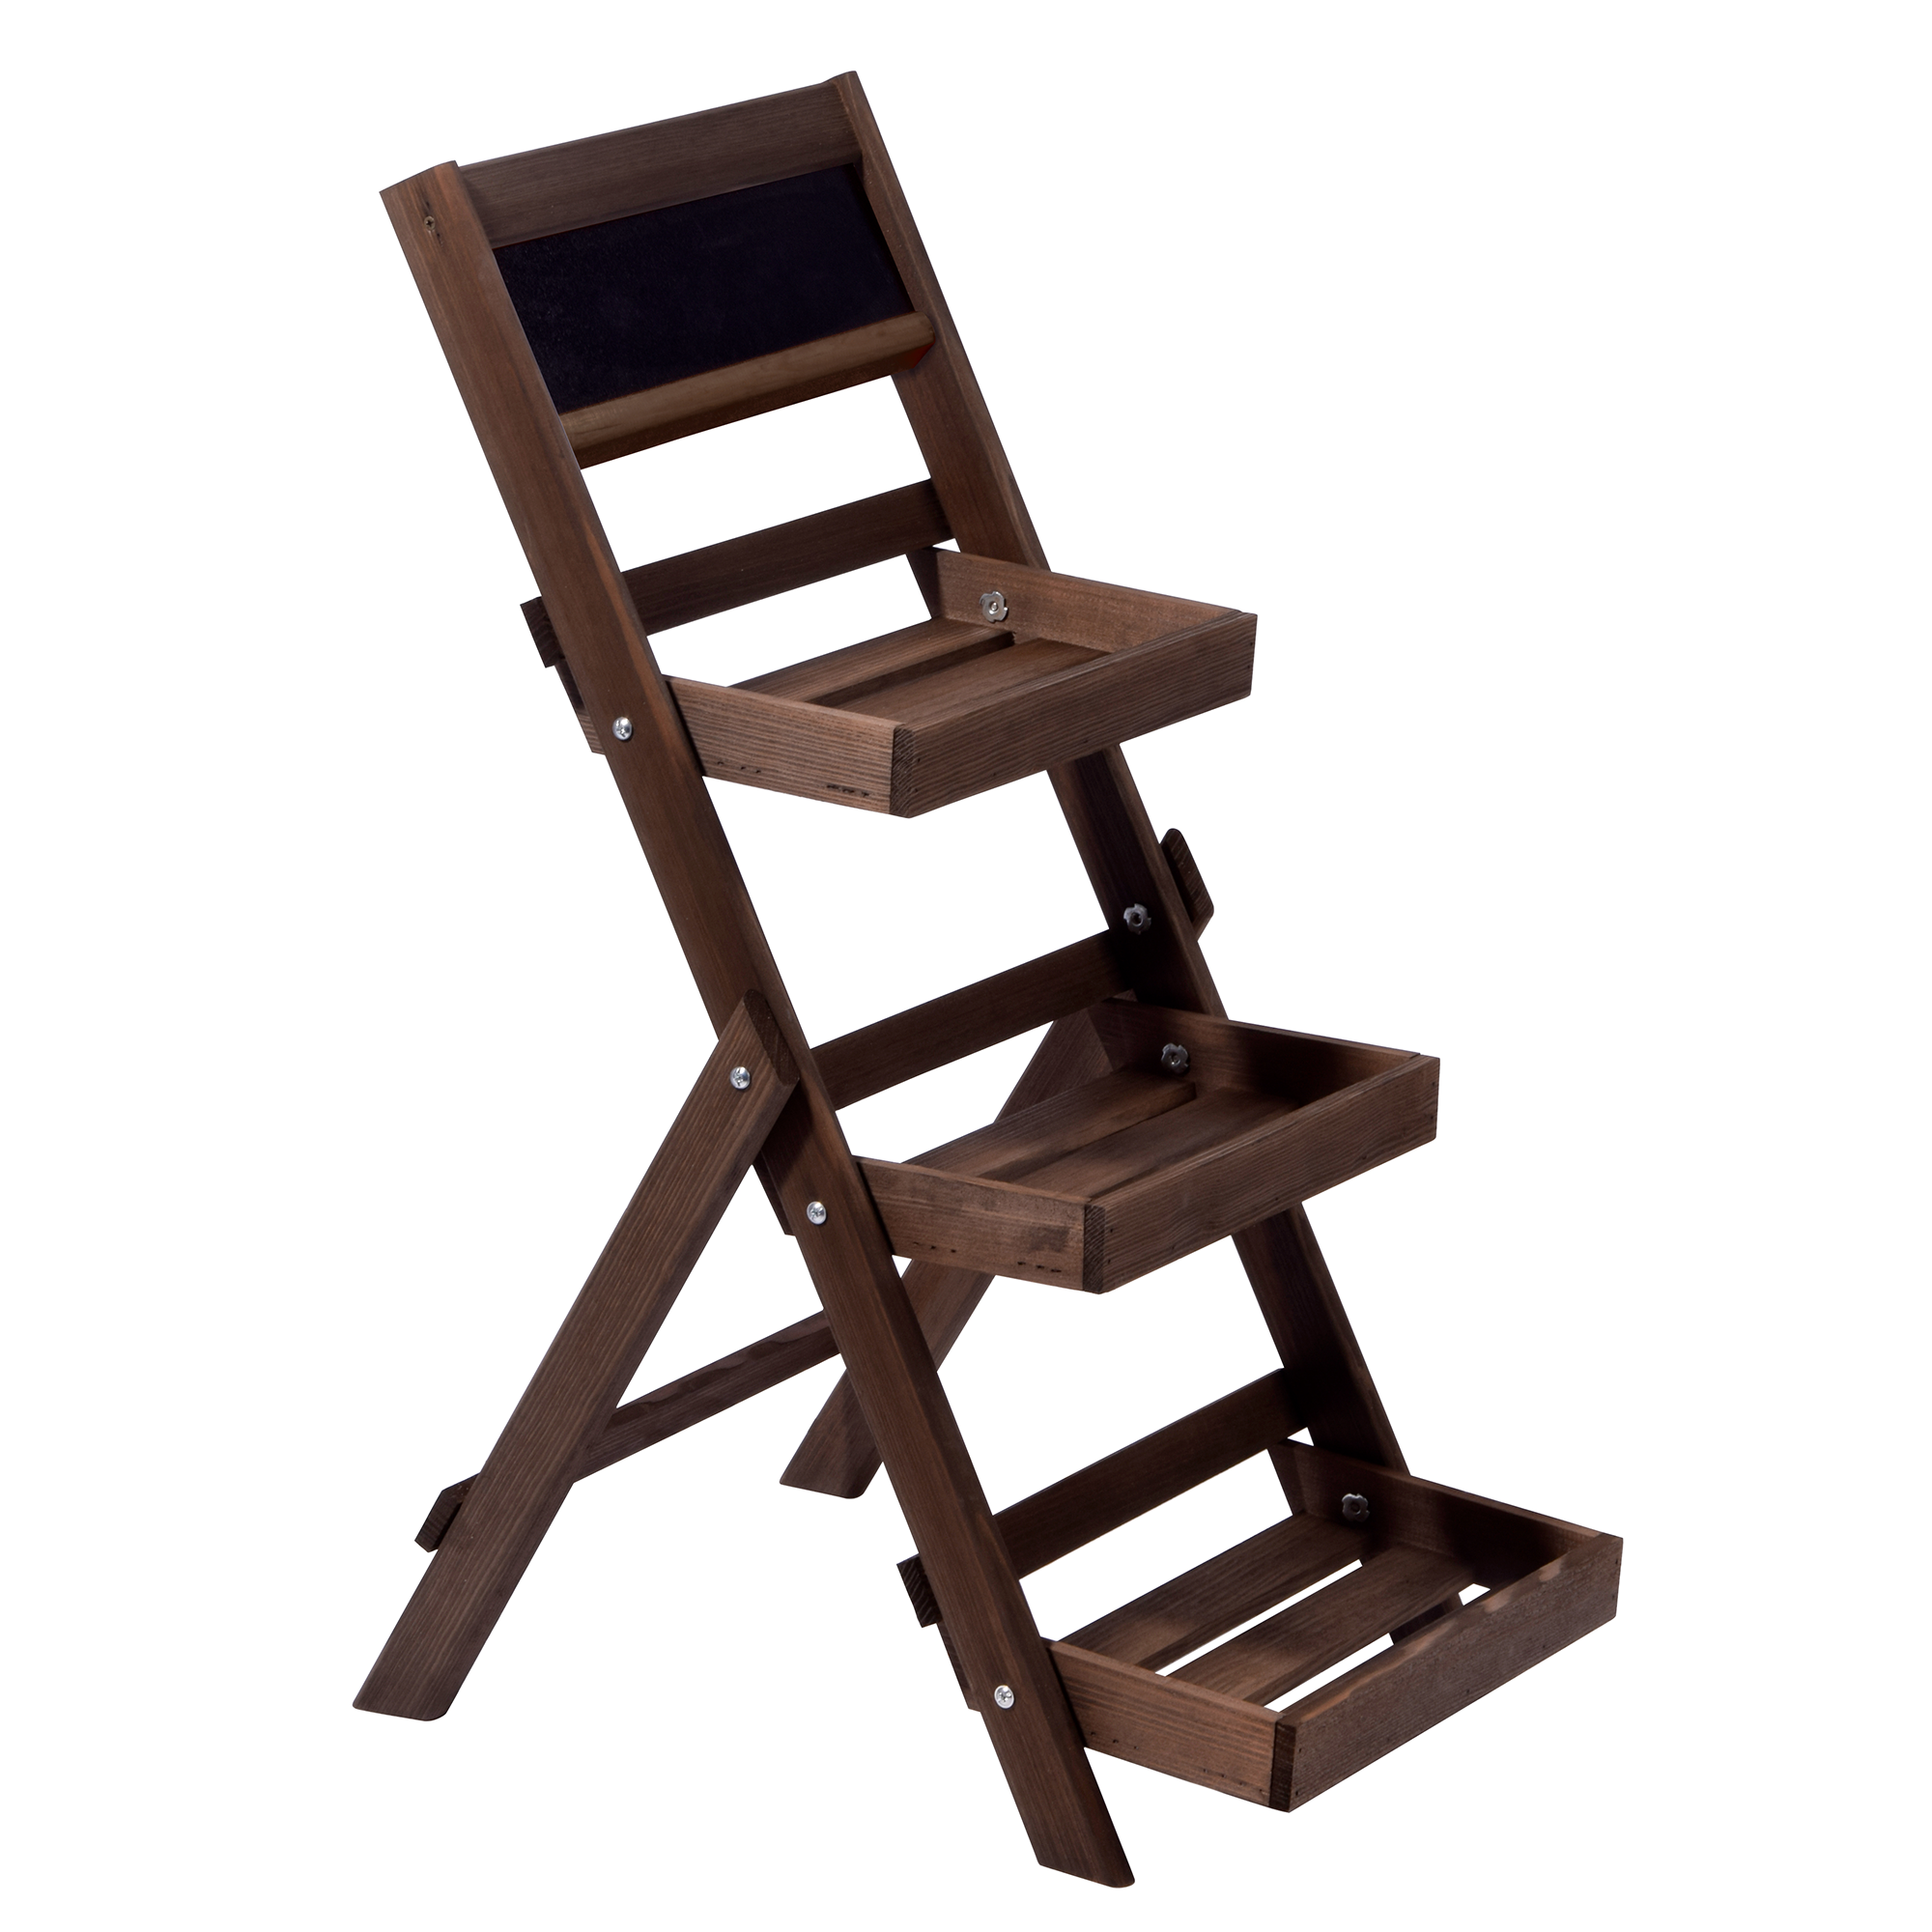 Pflanztreppe Holz dunkelbraun 49,5 x 69 x 38 cm + product picture